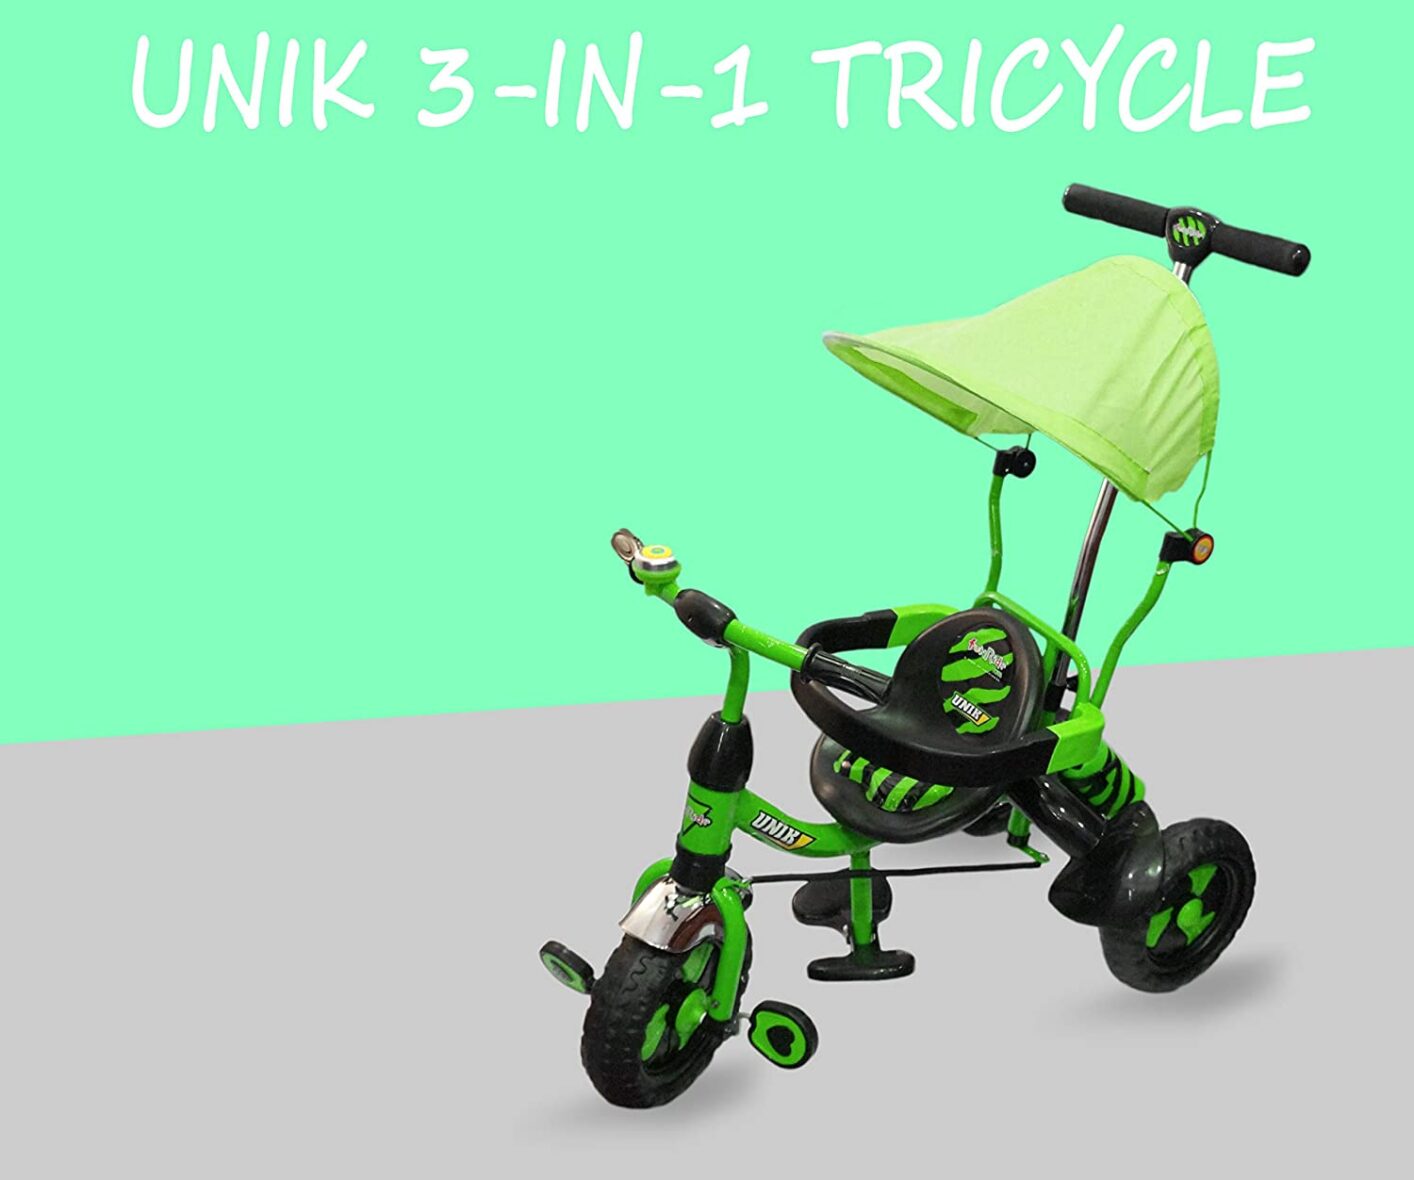 Fun Ride Baby Tricycle Unik Deluxe Rider 1 to 4 Years (4)